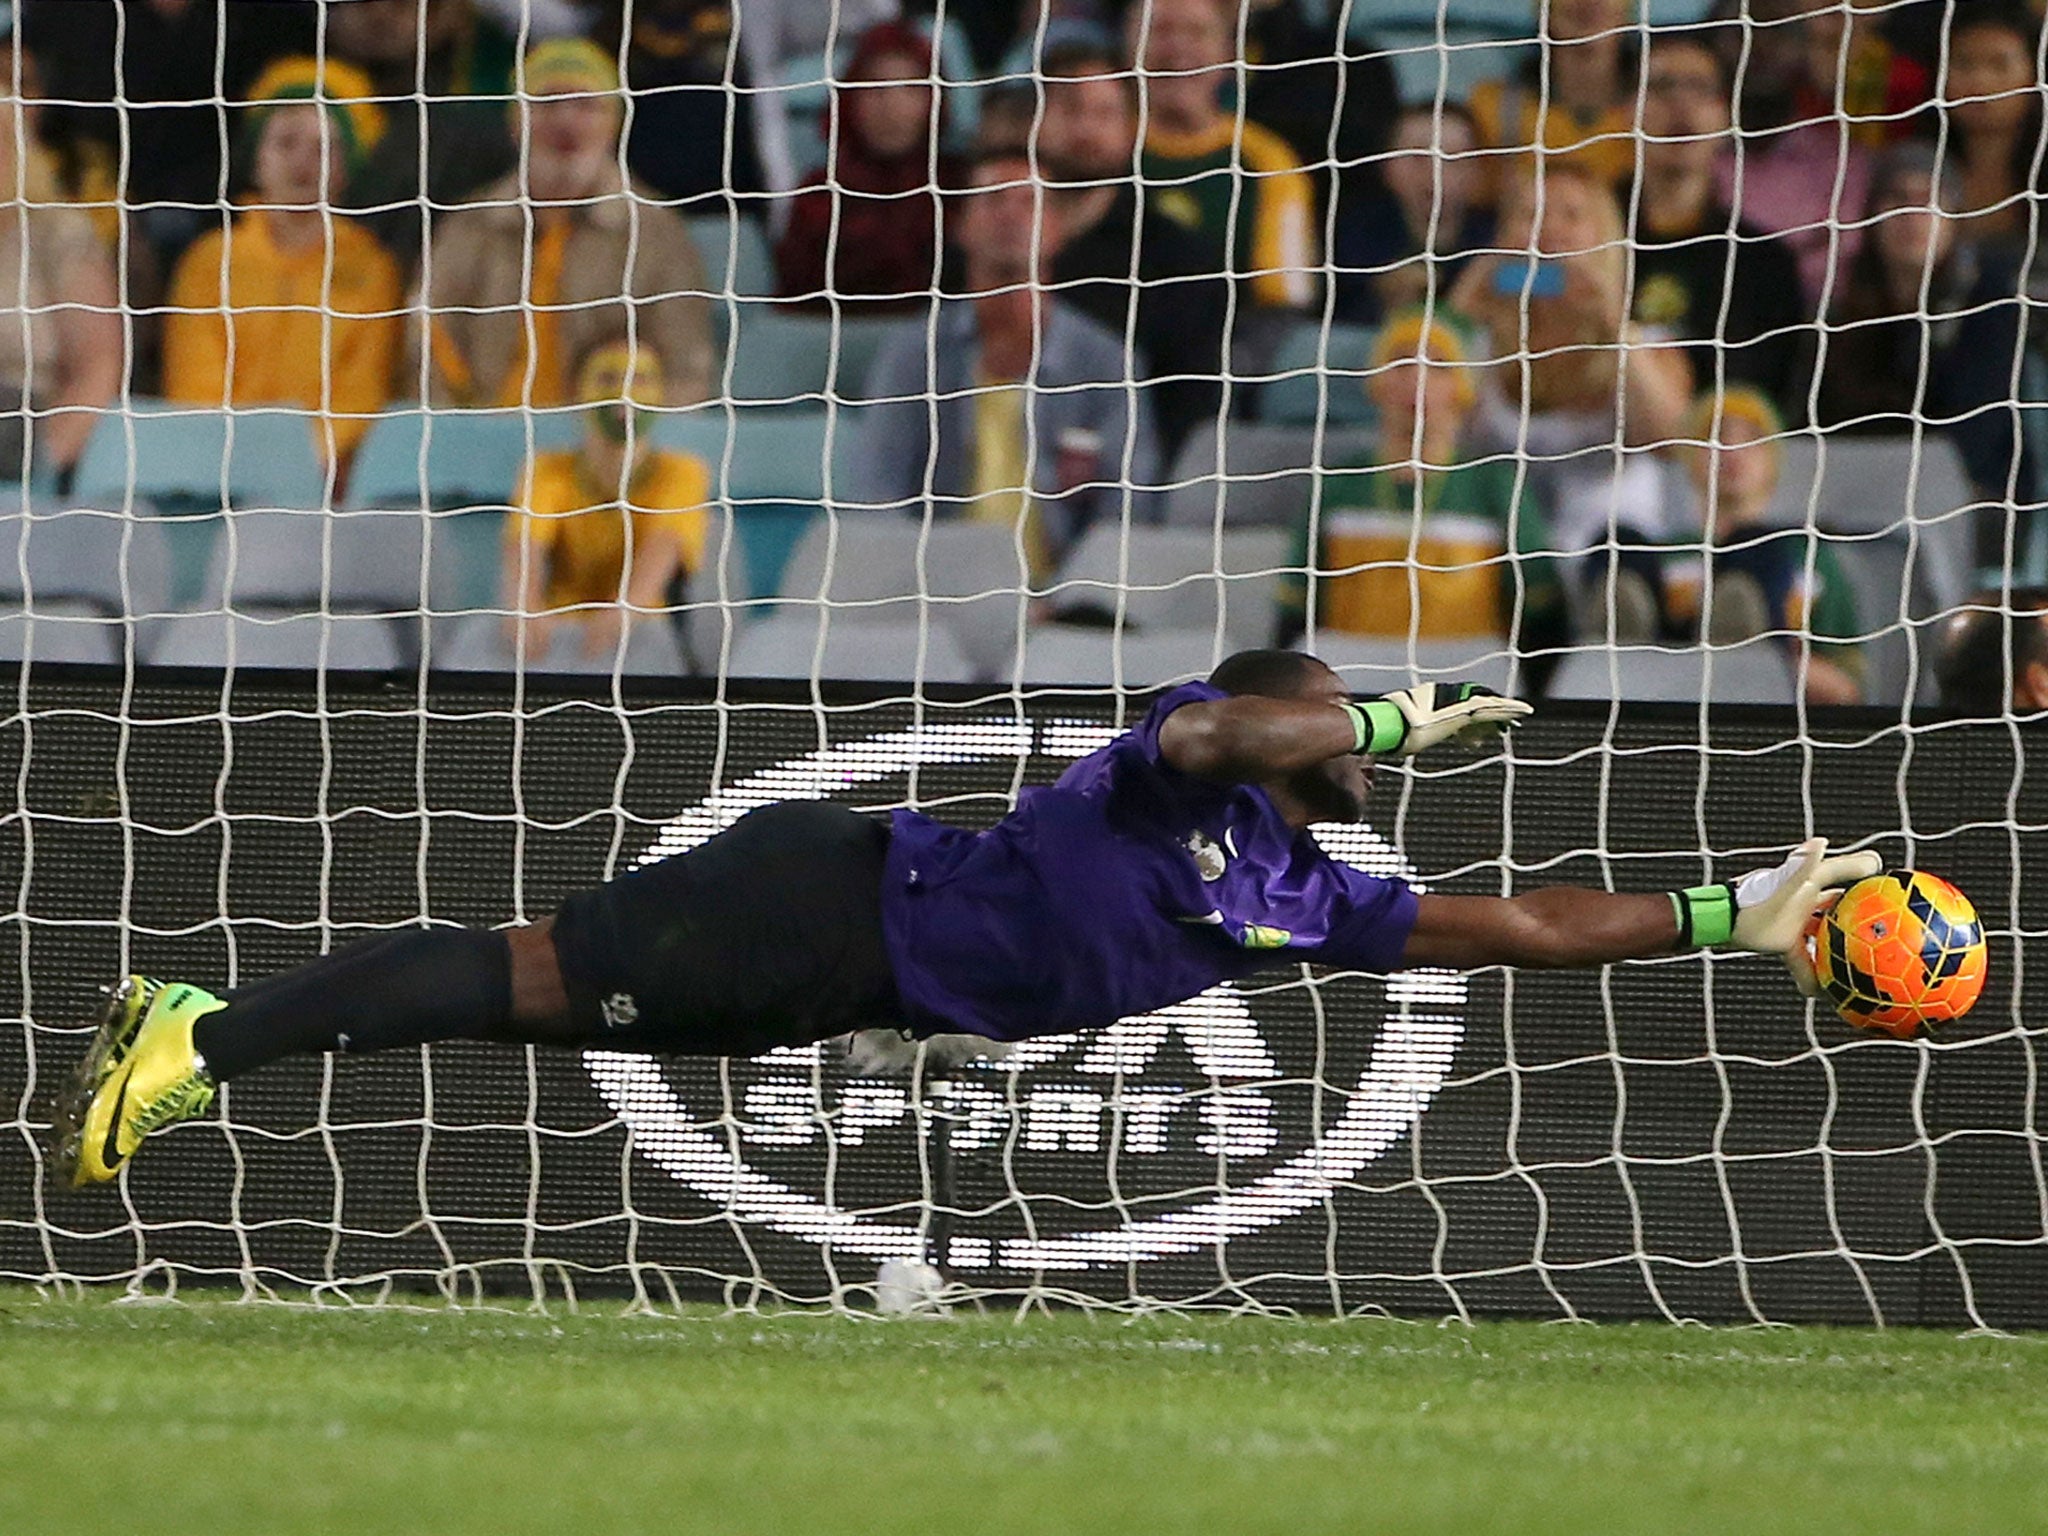 Senzo Robert Meyiwa makes a diving save against Australia during their friendly soccer match in Sydney